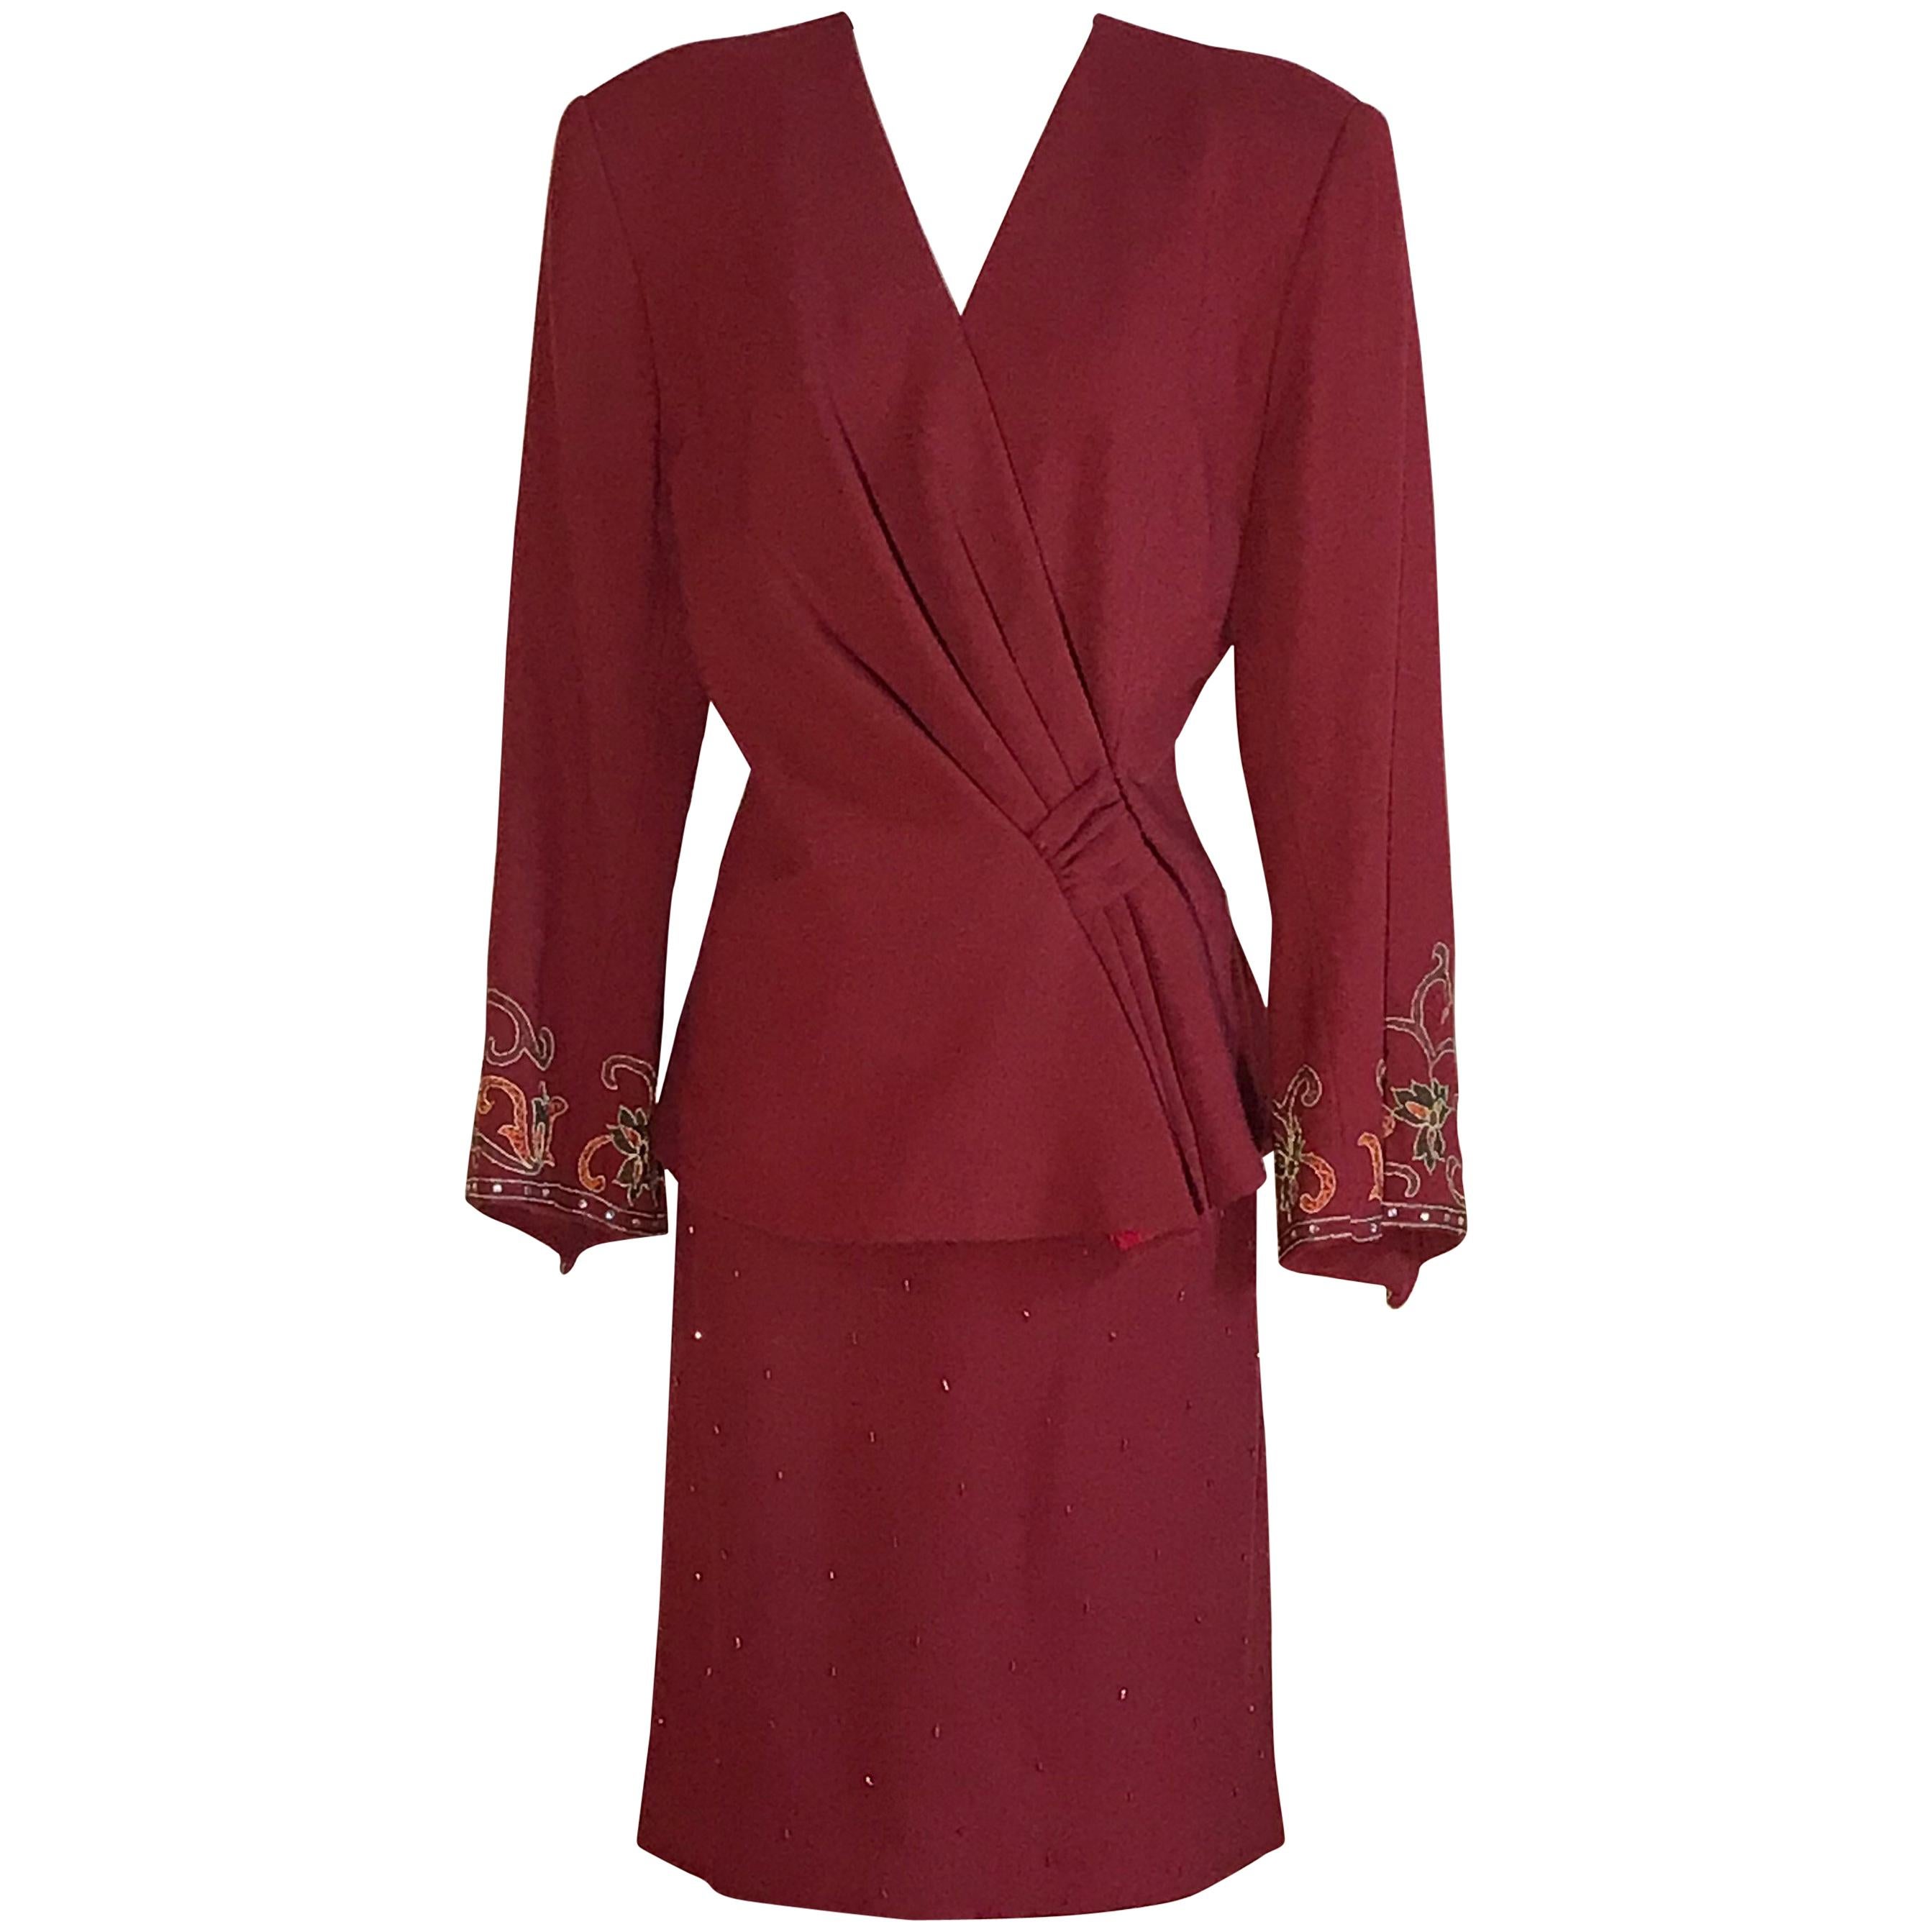 Pierre Balmain 1980s Cranberry Red Beaded Embroidered Sleeve Jacket Skirt Suit 